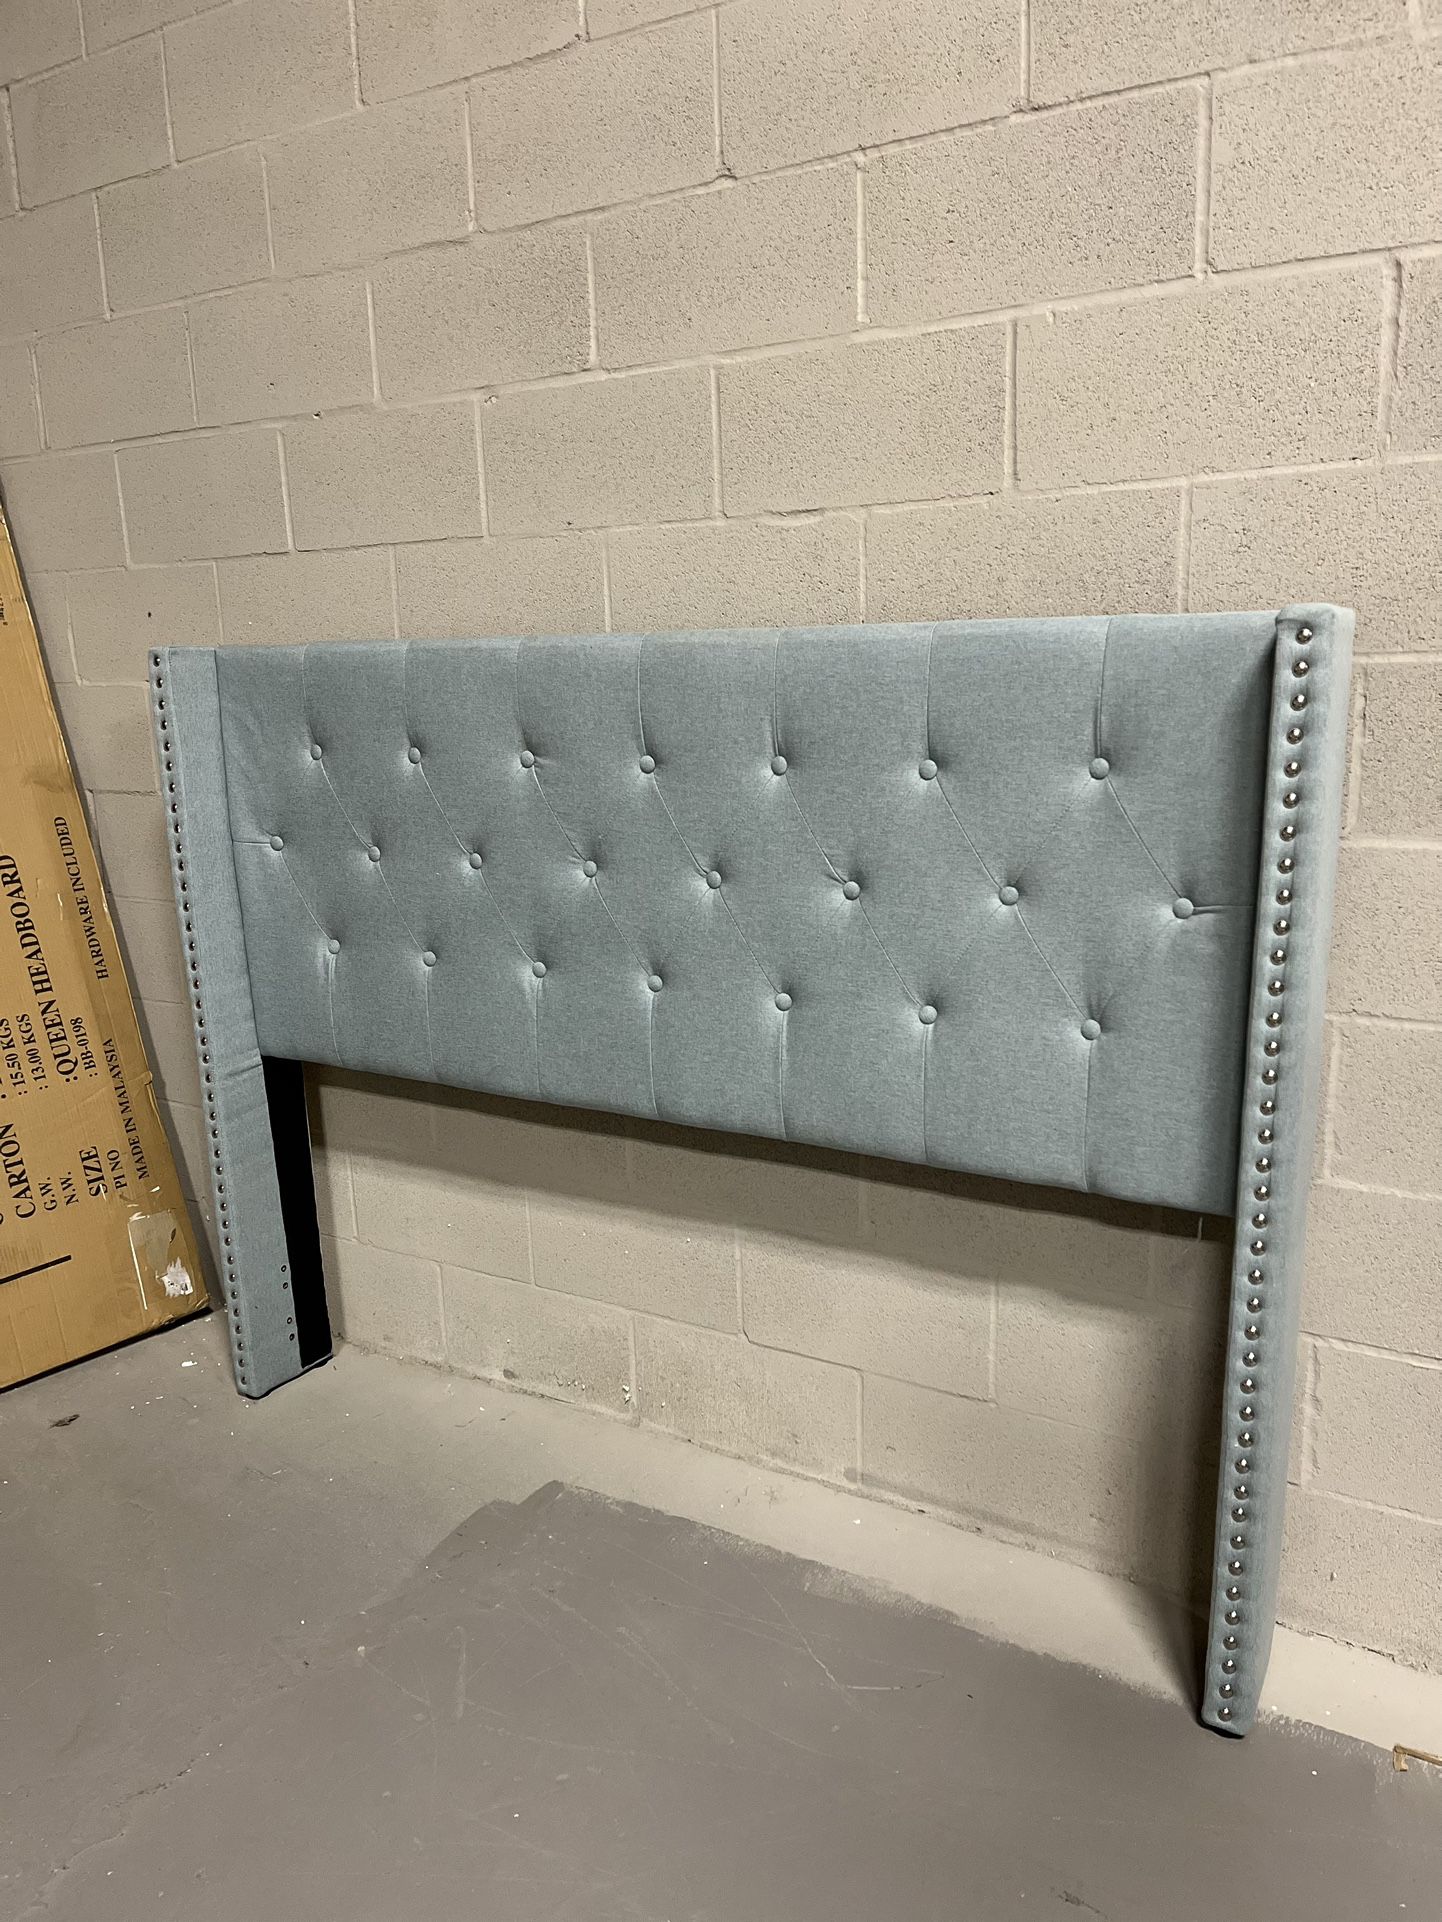 Queen Bed, Gray Teal Linen Complete Bed- headboard, footboard, and frame